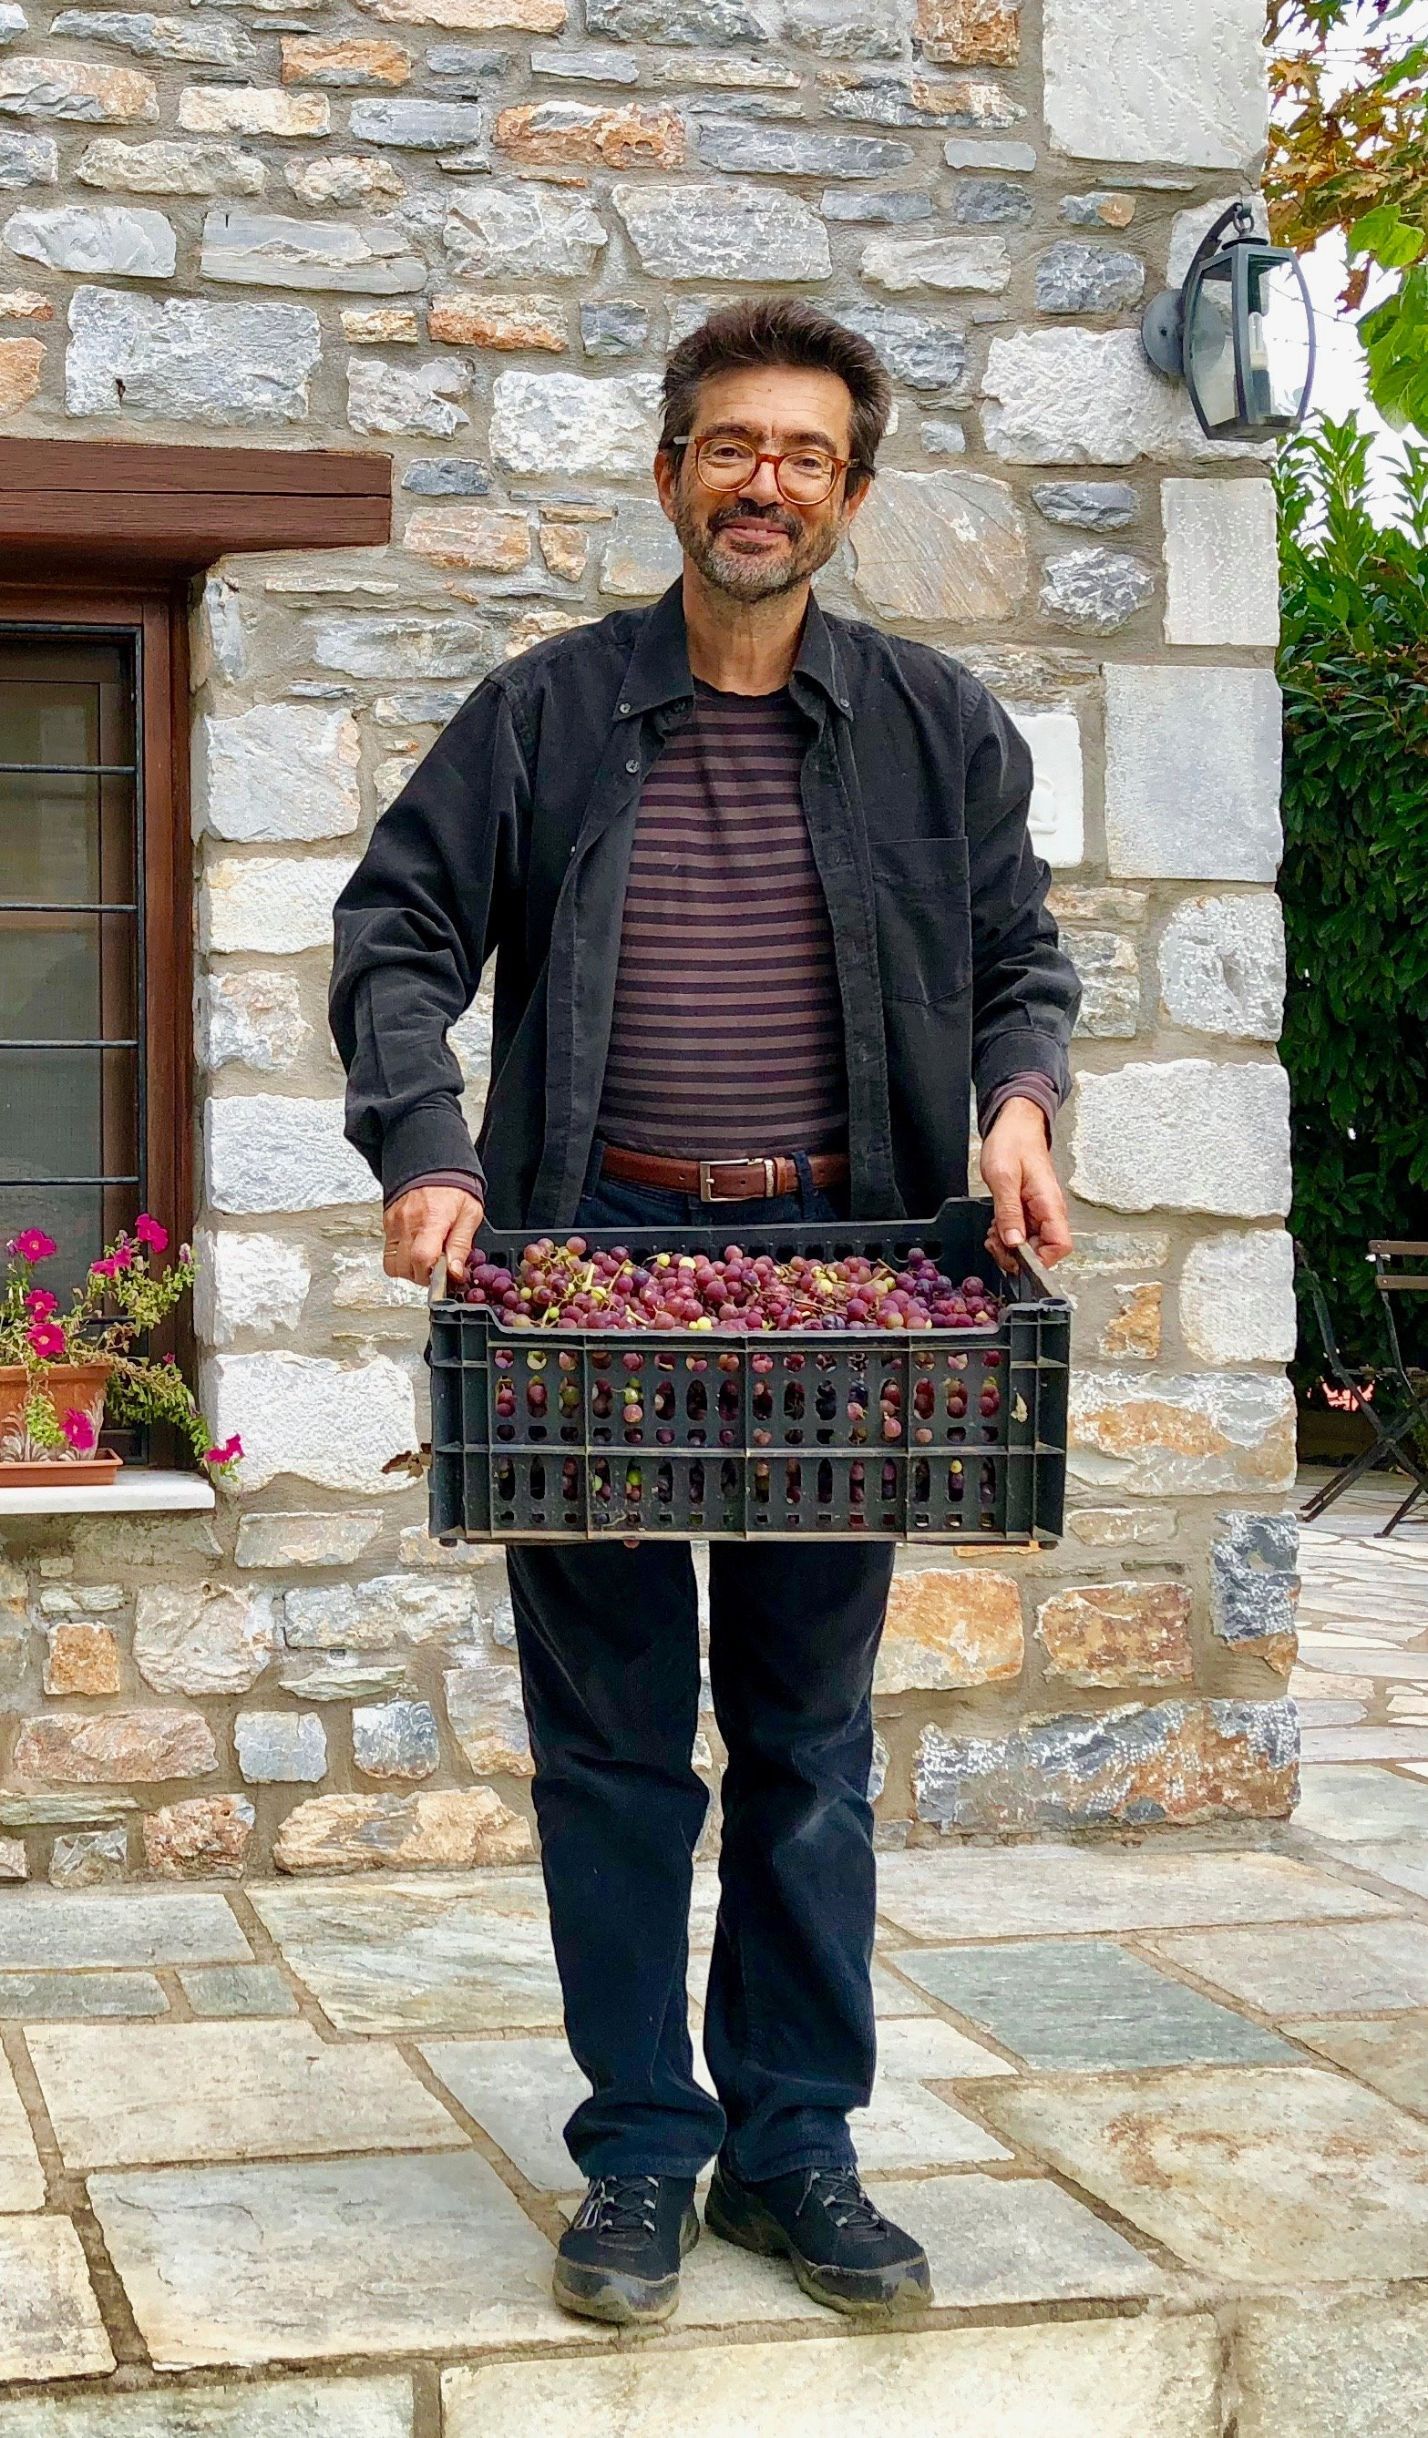 Man holding a crate of grapes in Greece.